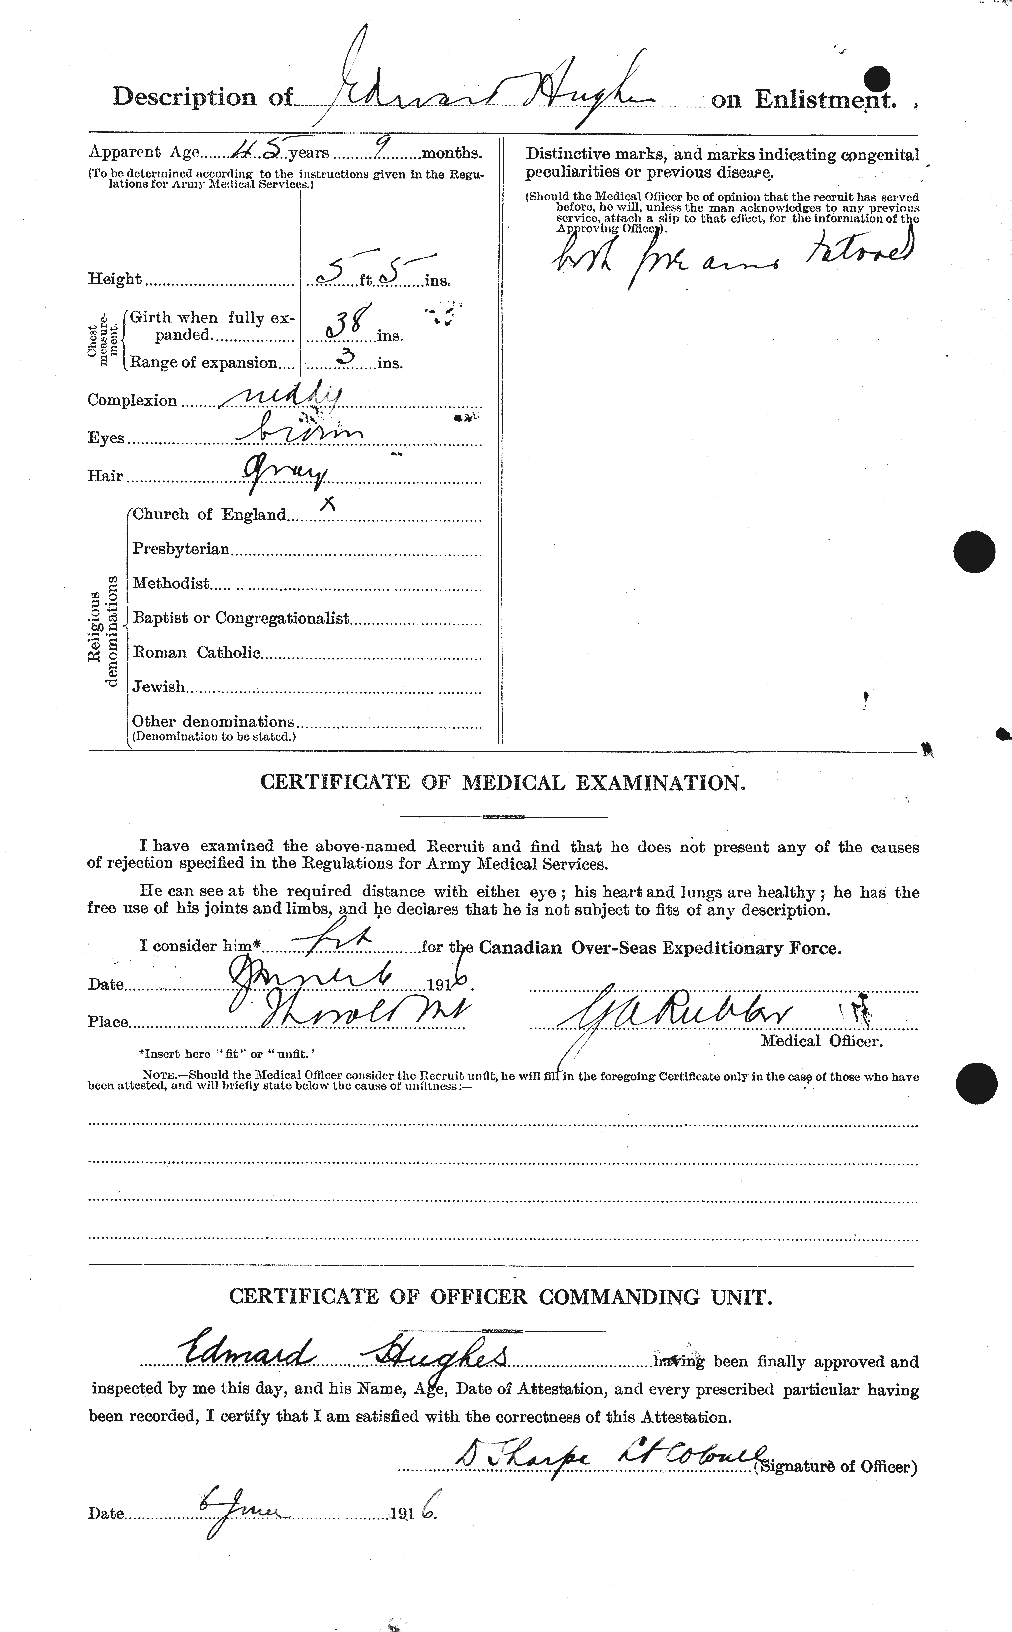 Personnel Records of the First World War - CEF 402675b